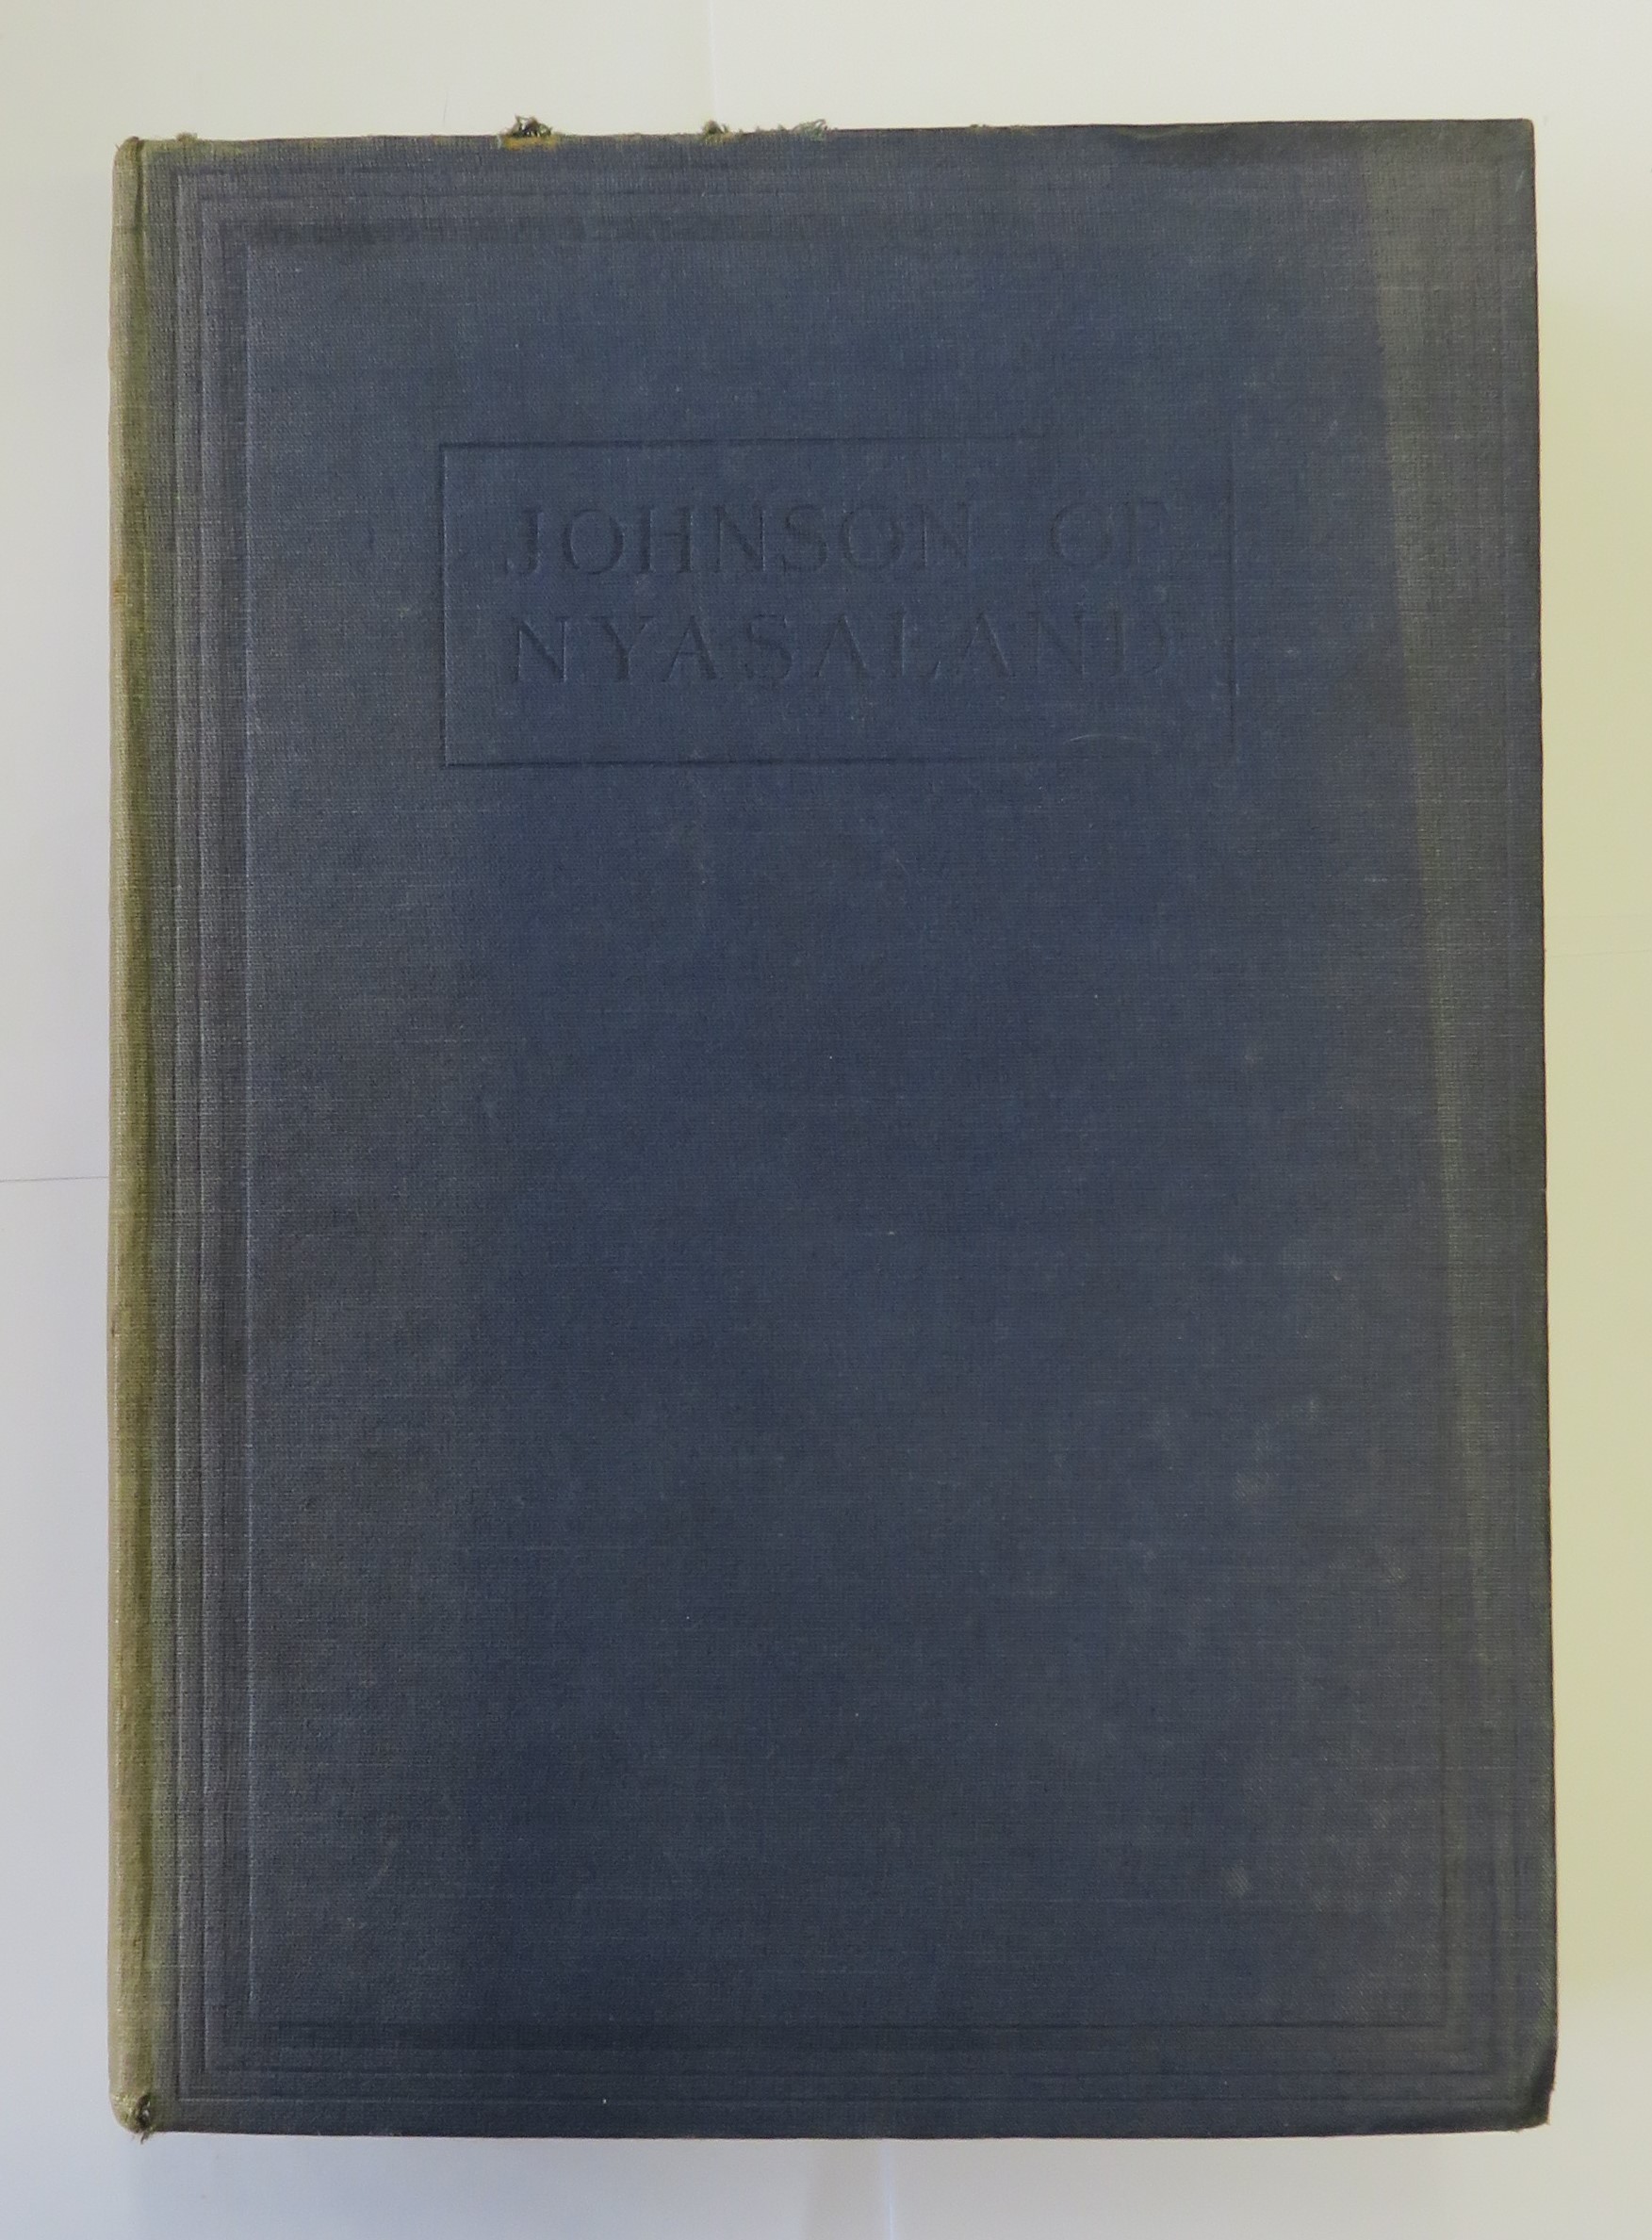 Johnson of Nyasaland a Study of the Life and Work of William Percival Johnson, D.D. Archdeacon of Nyasa, Missionary Pioneer 1876-1928